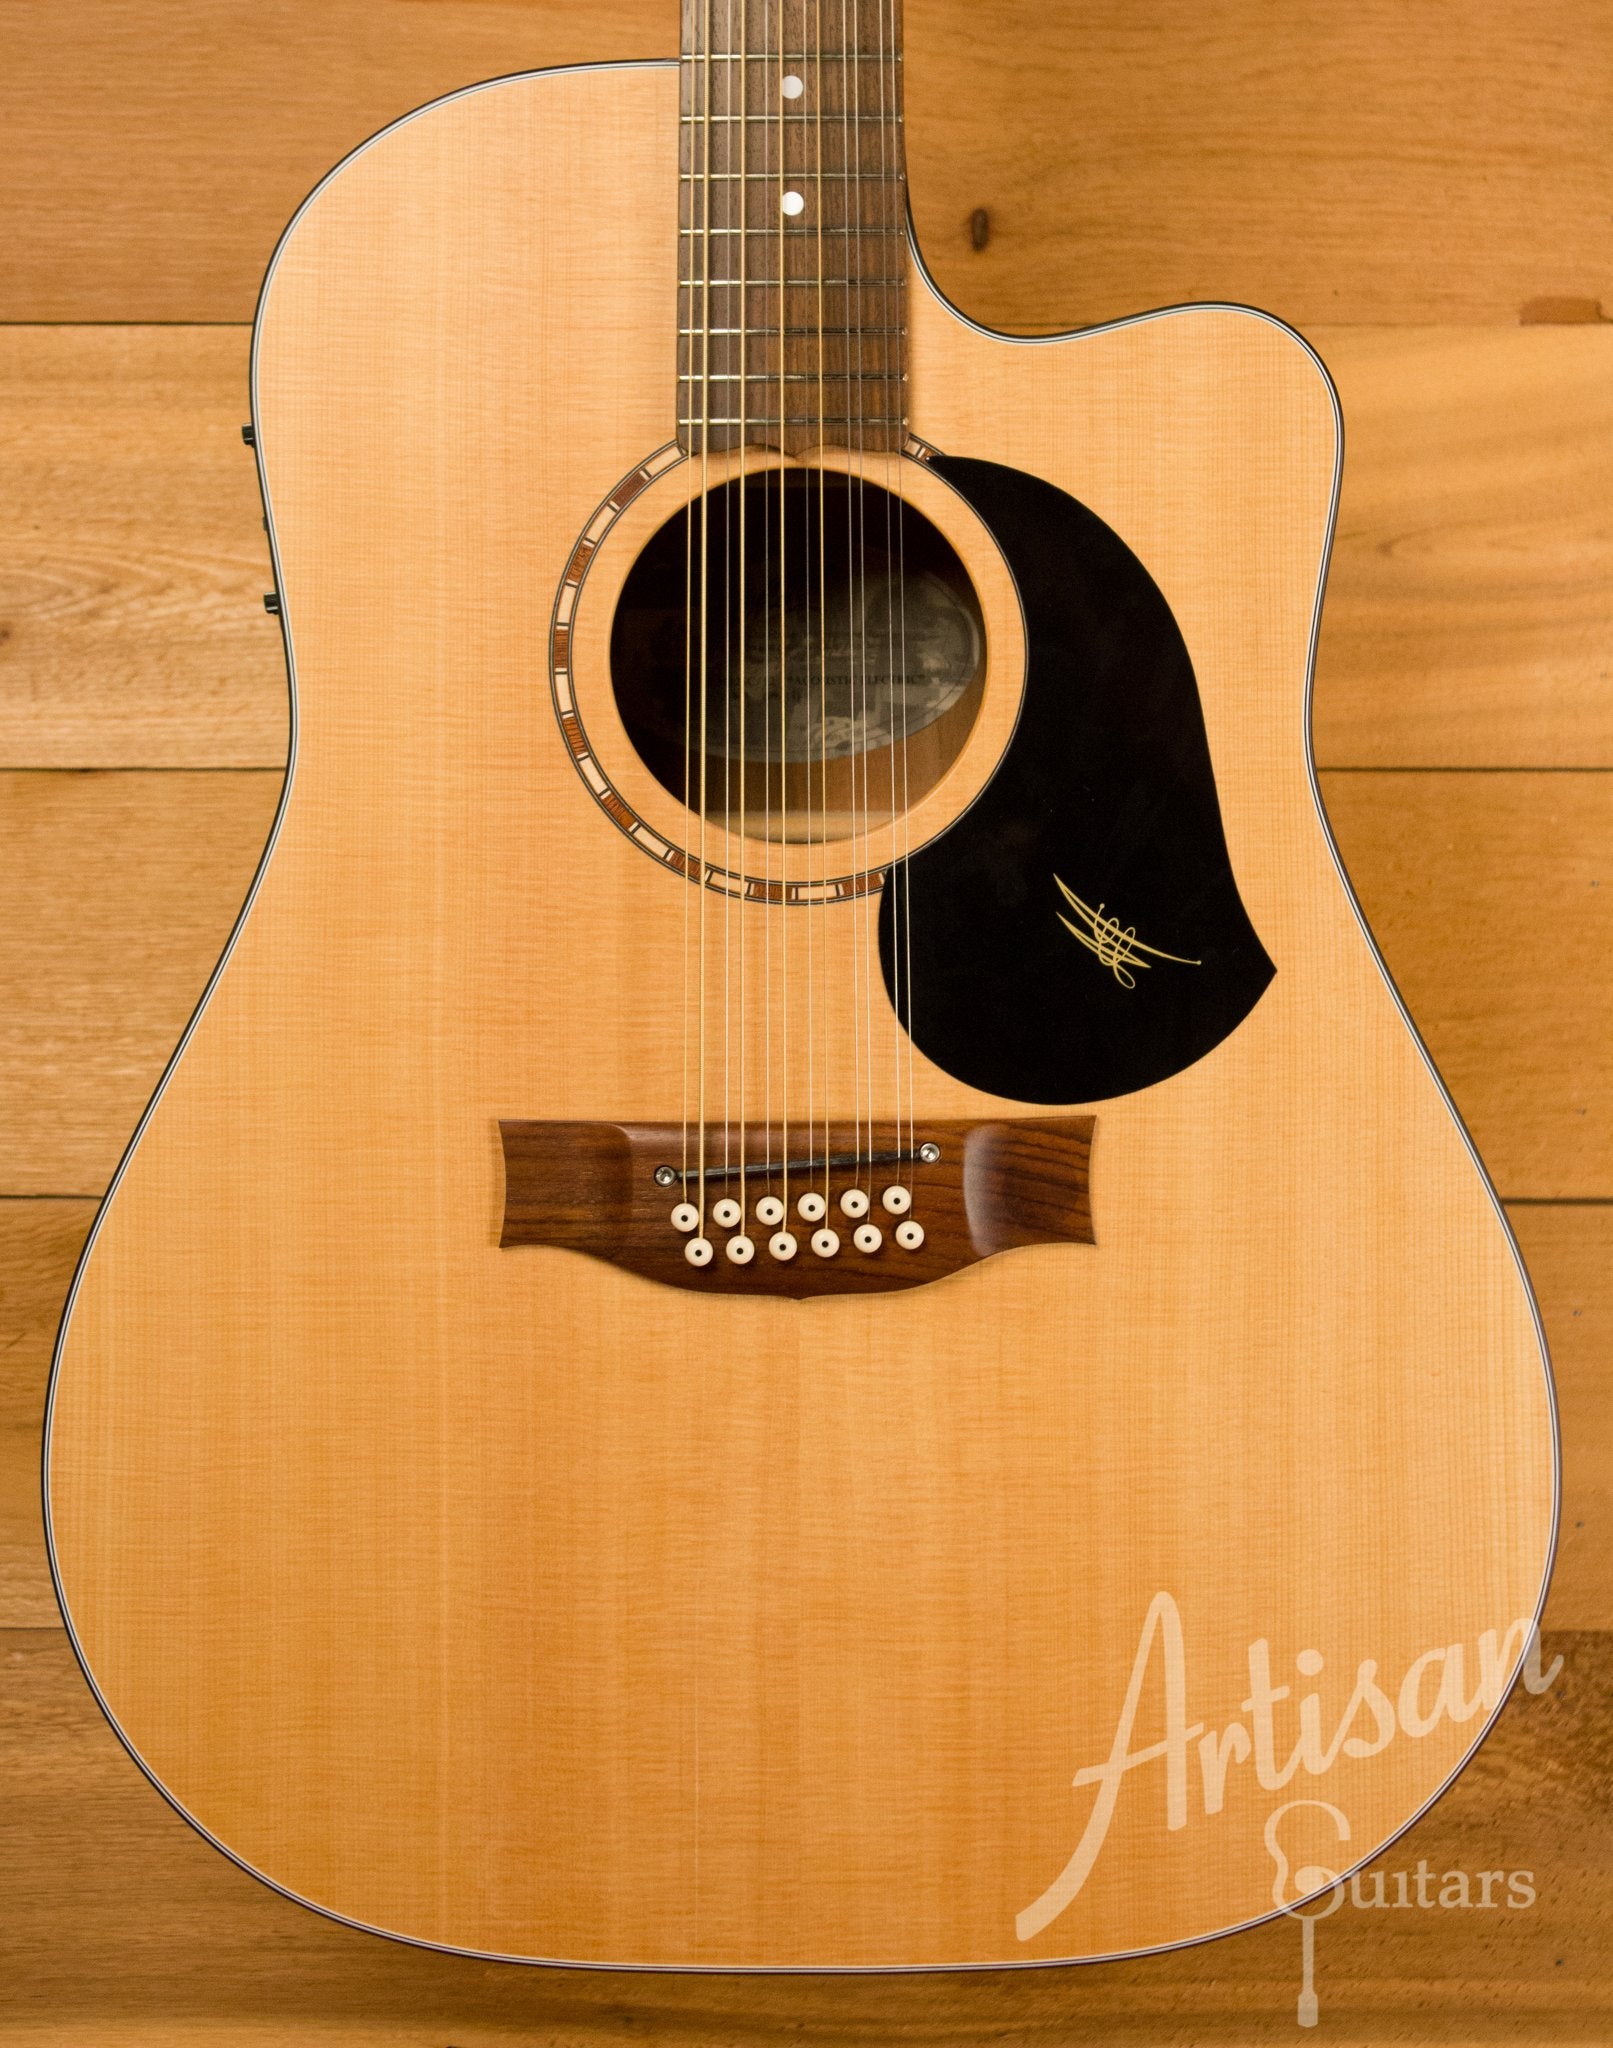 Maton EM425C12 12 String Acoustic Electric Guitar with Cutaway Pre-Owned 2014 ID-10757 - Artisan Guitars